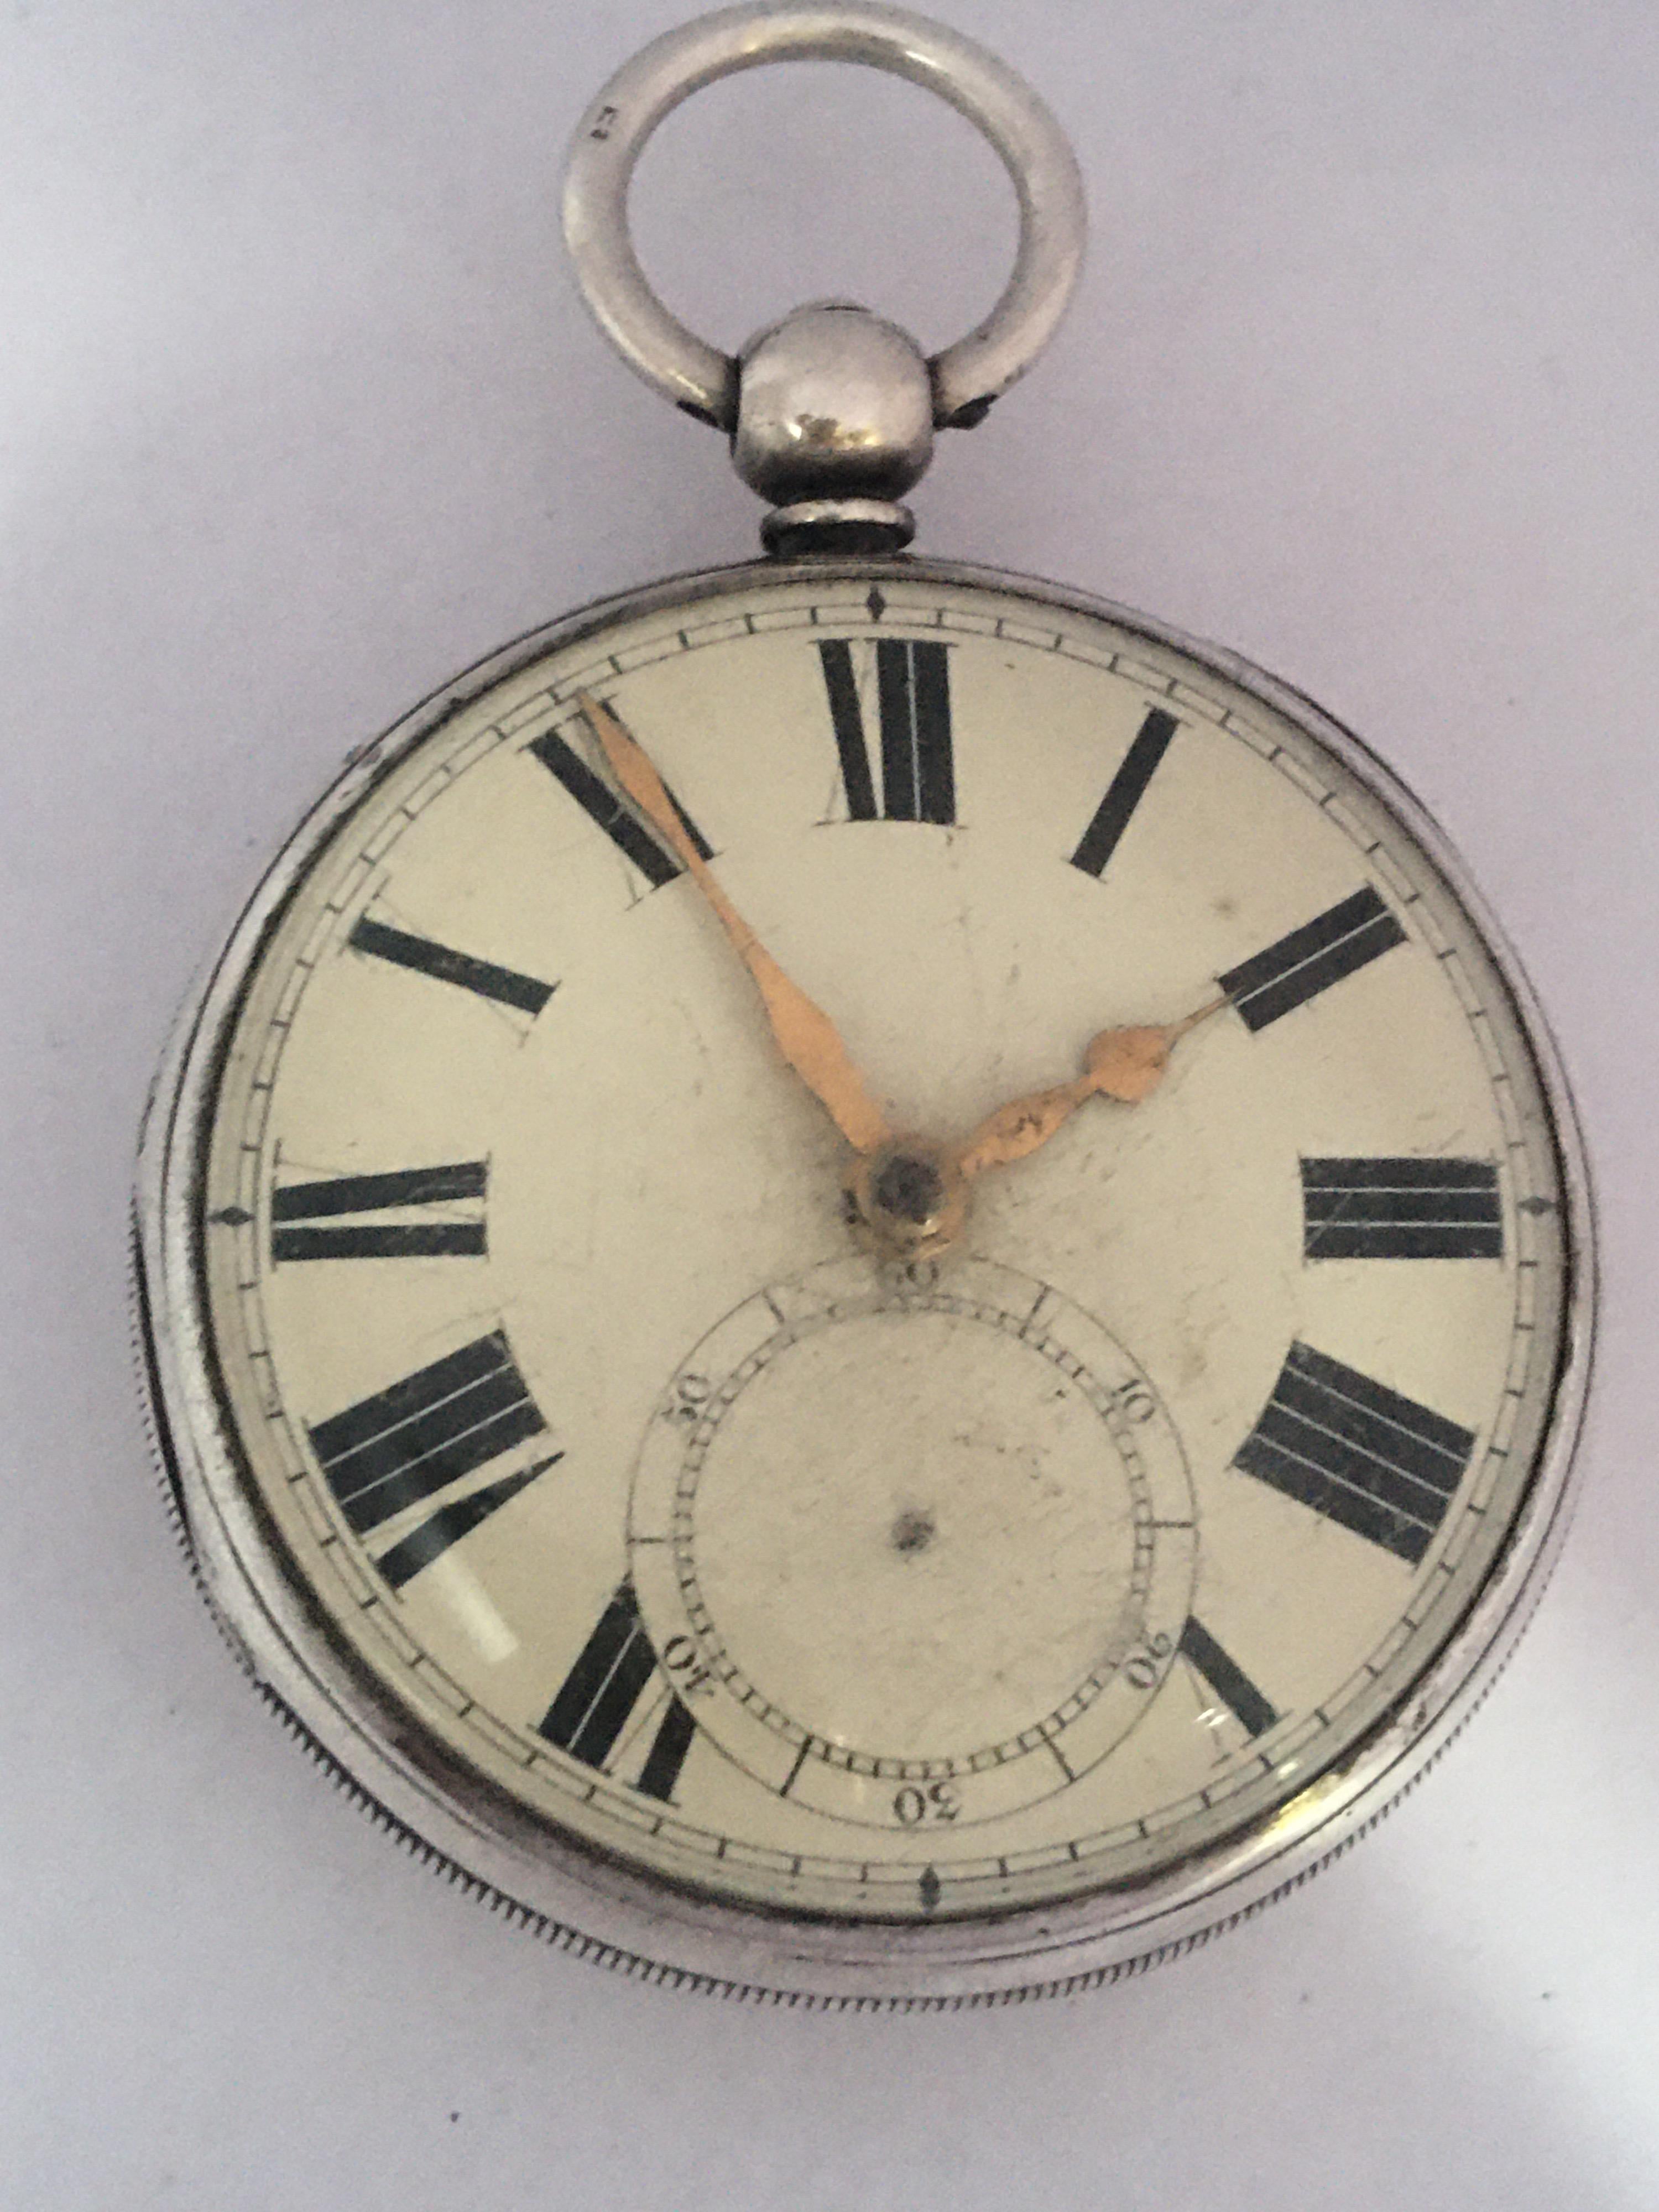 This beautiful antique 51mm diameter mechanical silver pocket watch is in good working condition and it is ticking well. Visible signs of ageing and wear with some scratches on the glass and on the watch case as shown. Some dents on the silver case